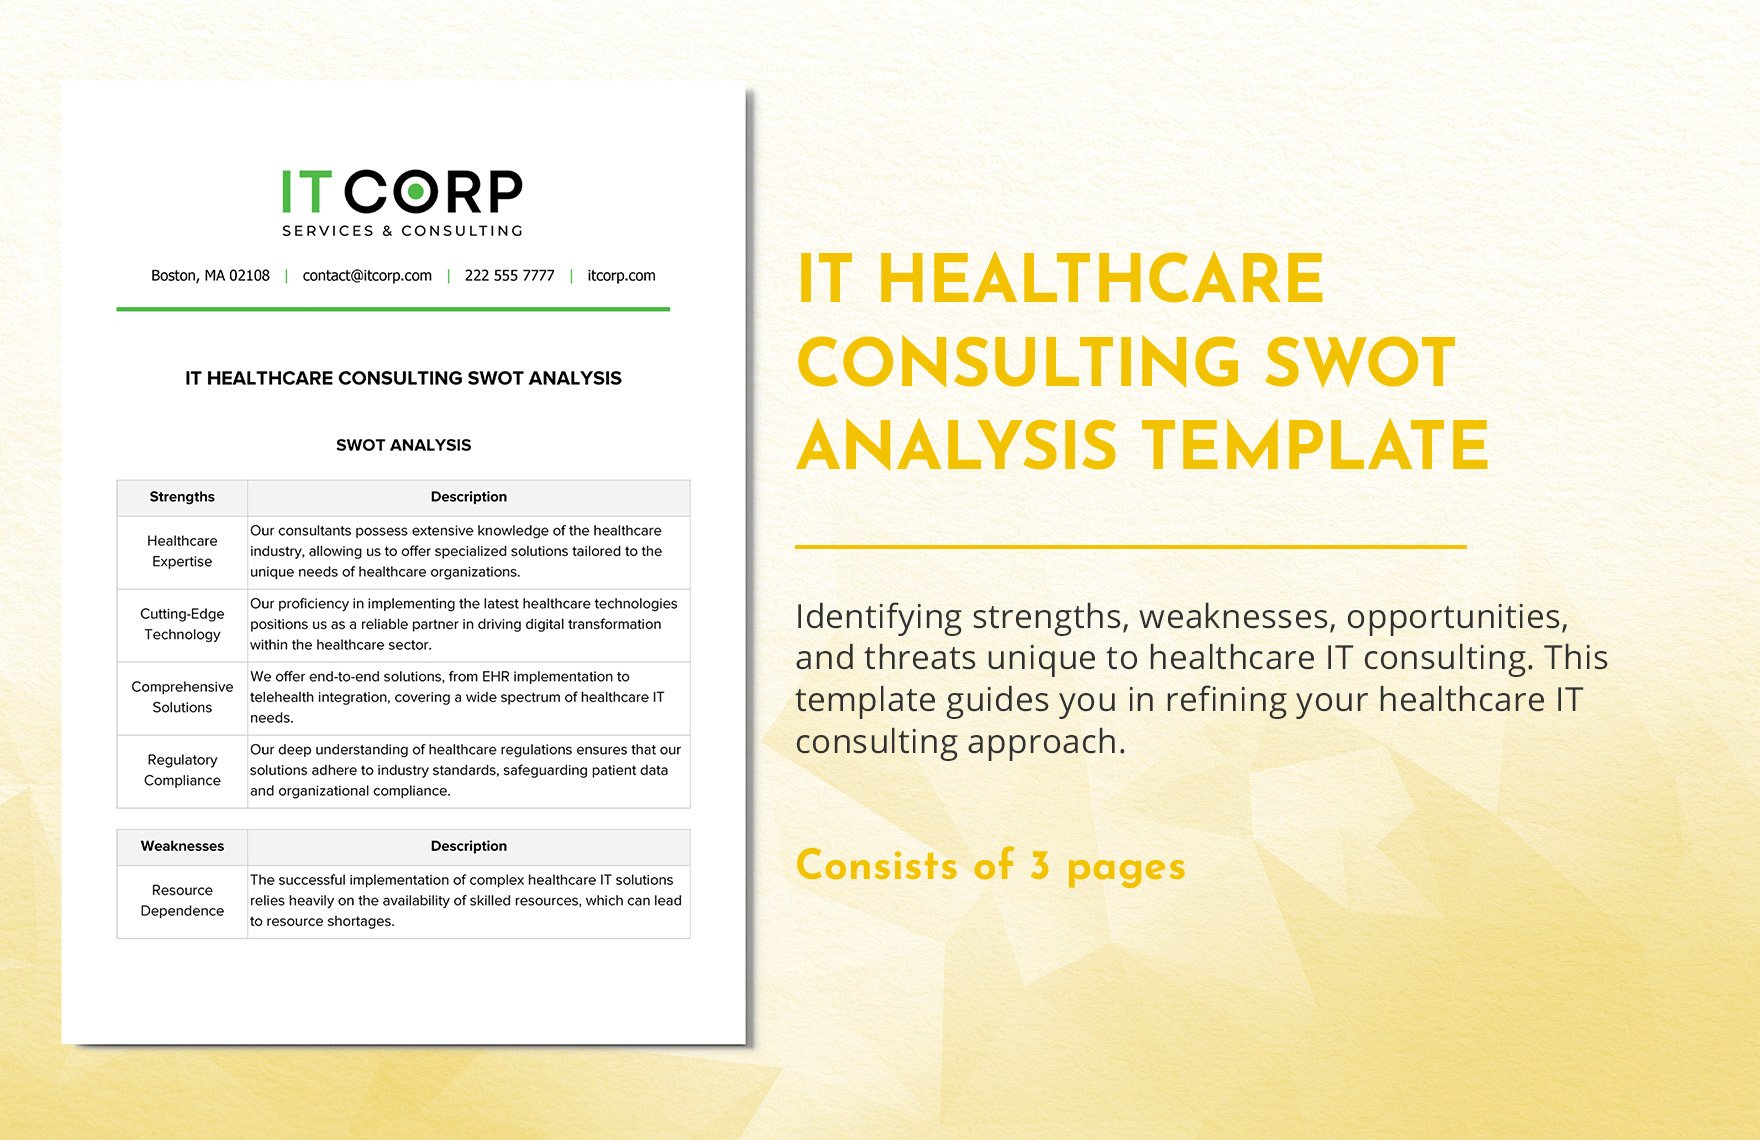 IT Healthcare Consulting SWOT Analysis Template